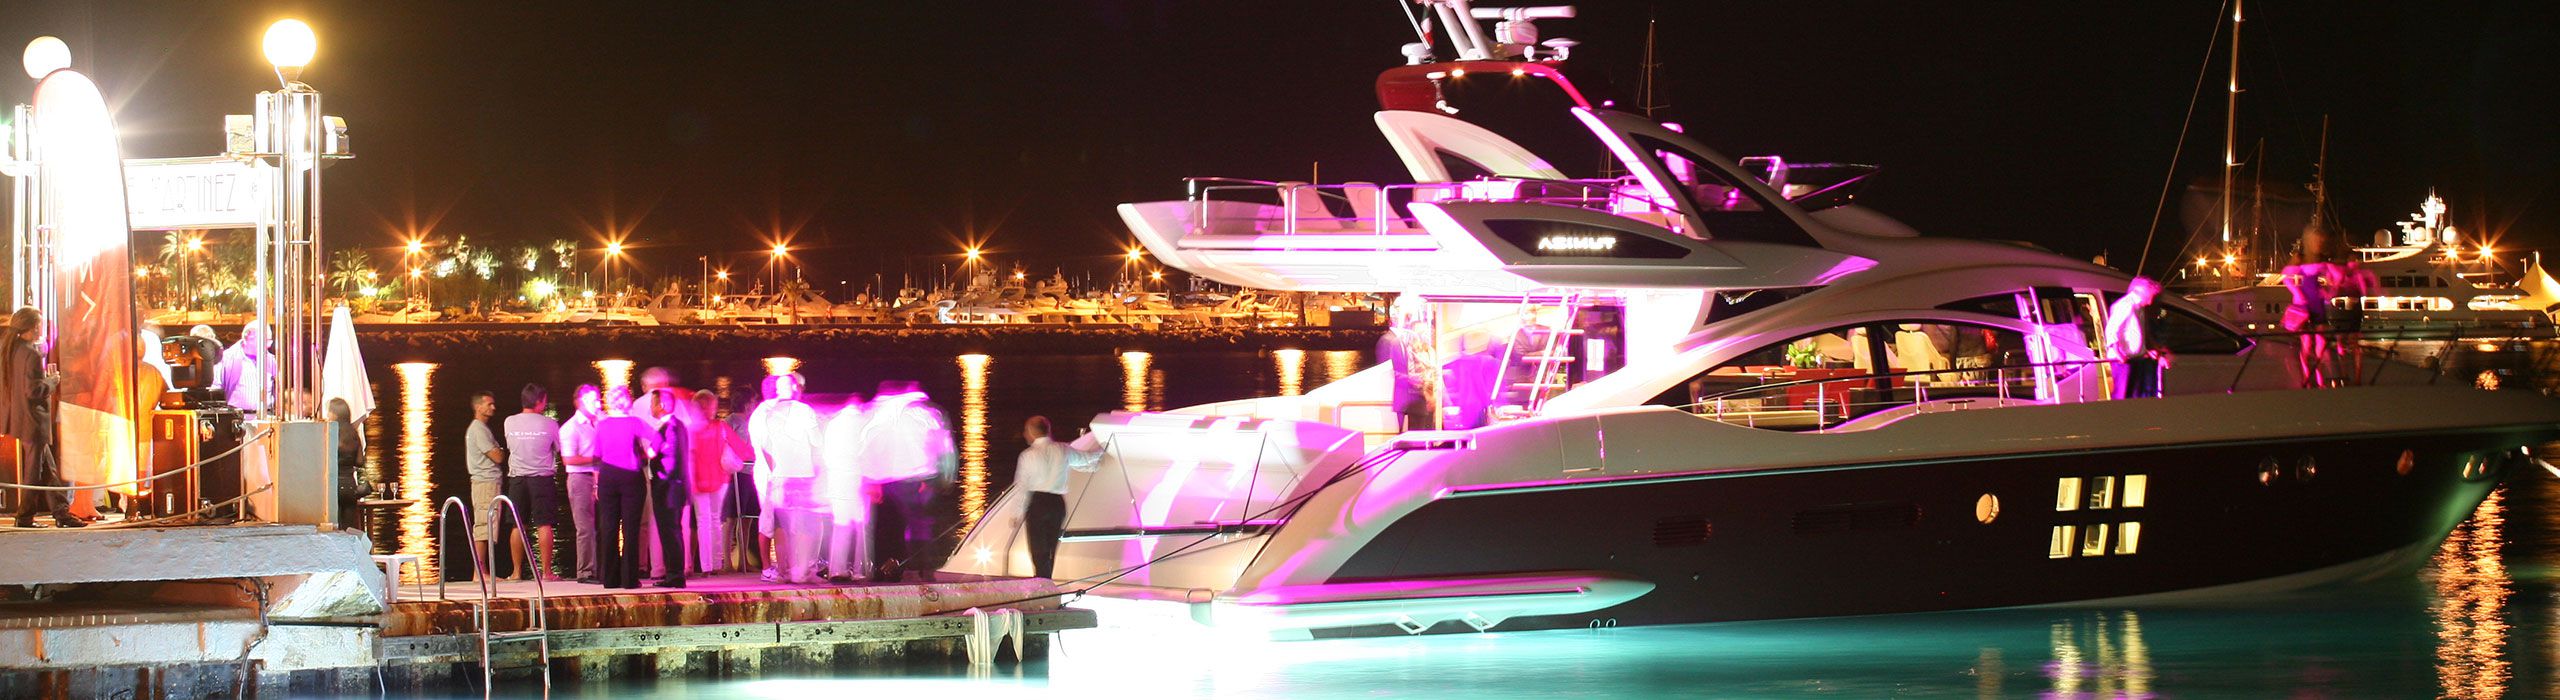 Cannes Yachtinf Festival